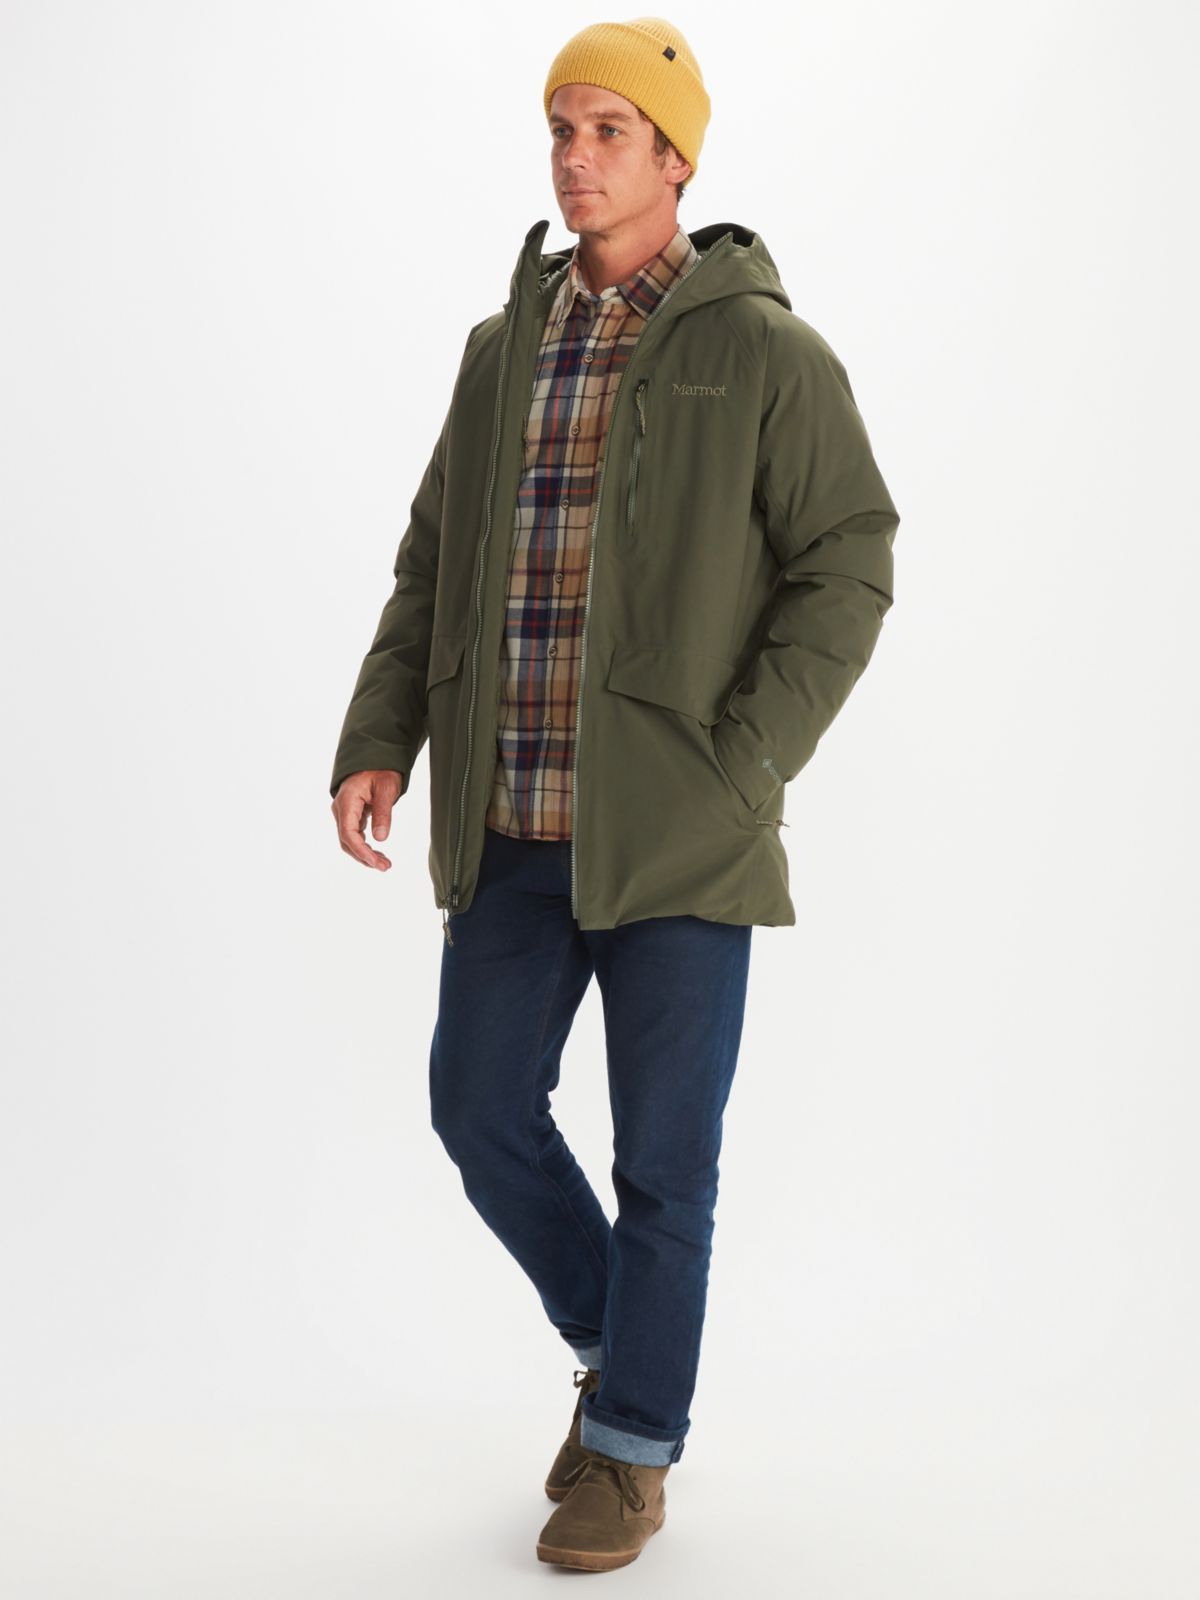 model wearing assorted outdoor fall clothing